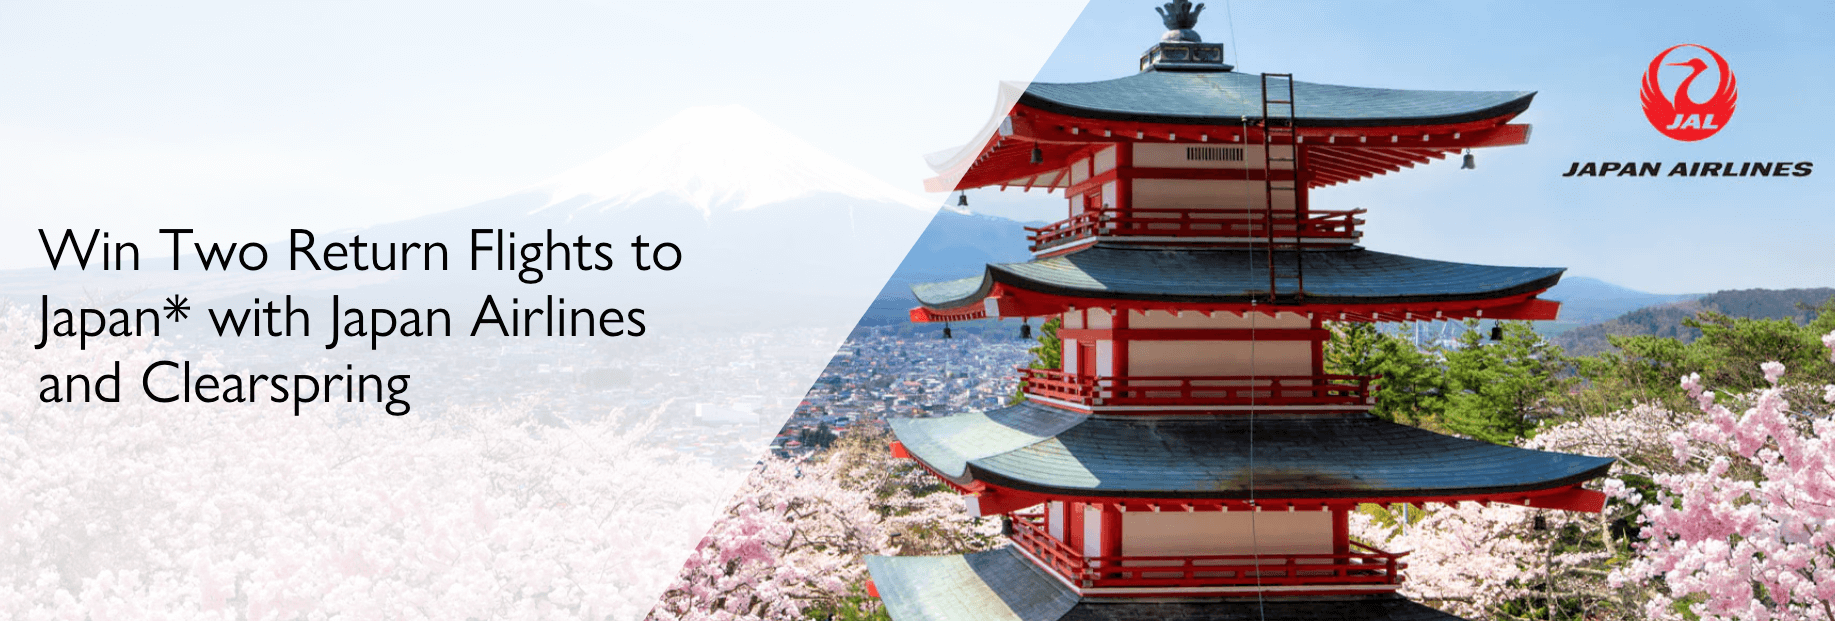 Win return flights to Japan with Clearspring and Japan Airlines